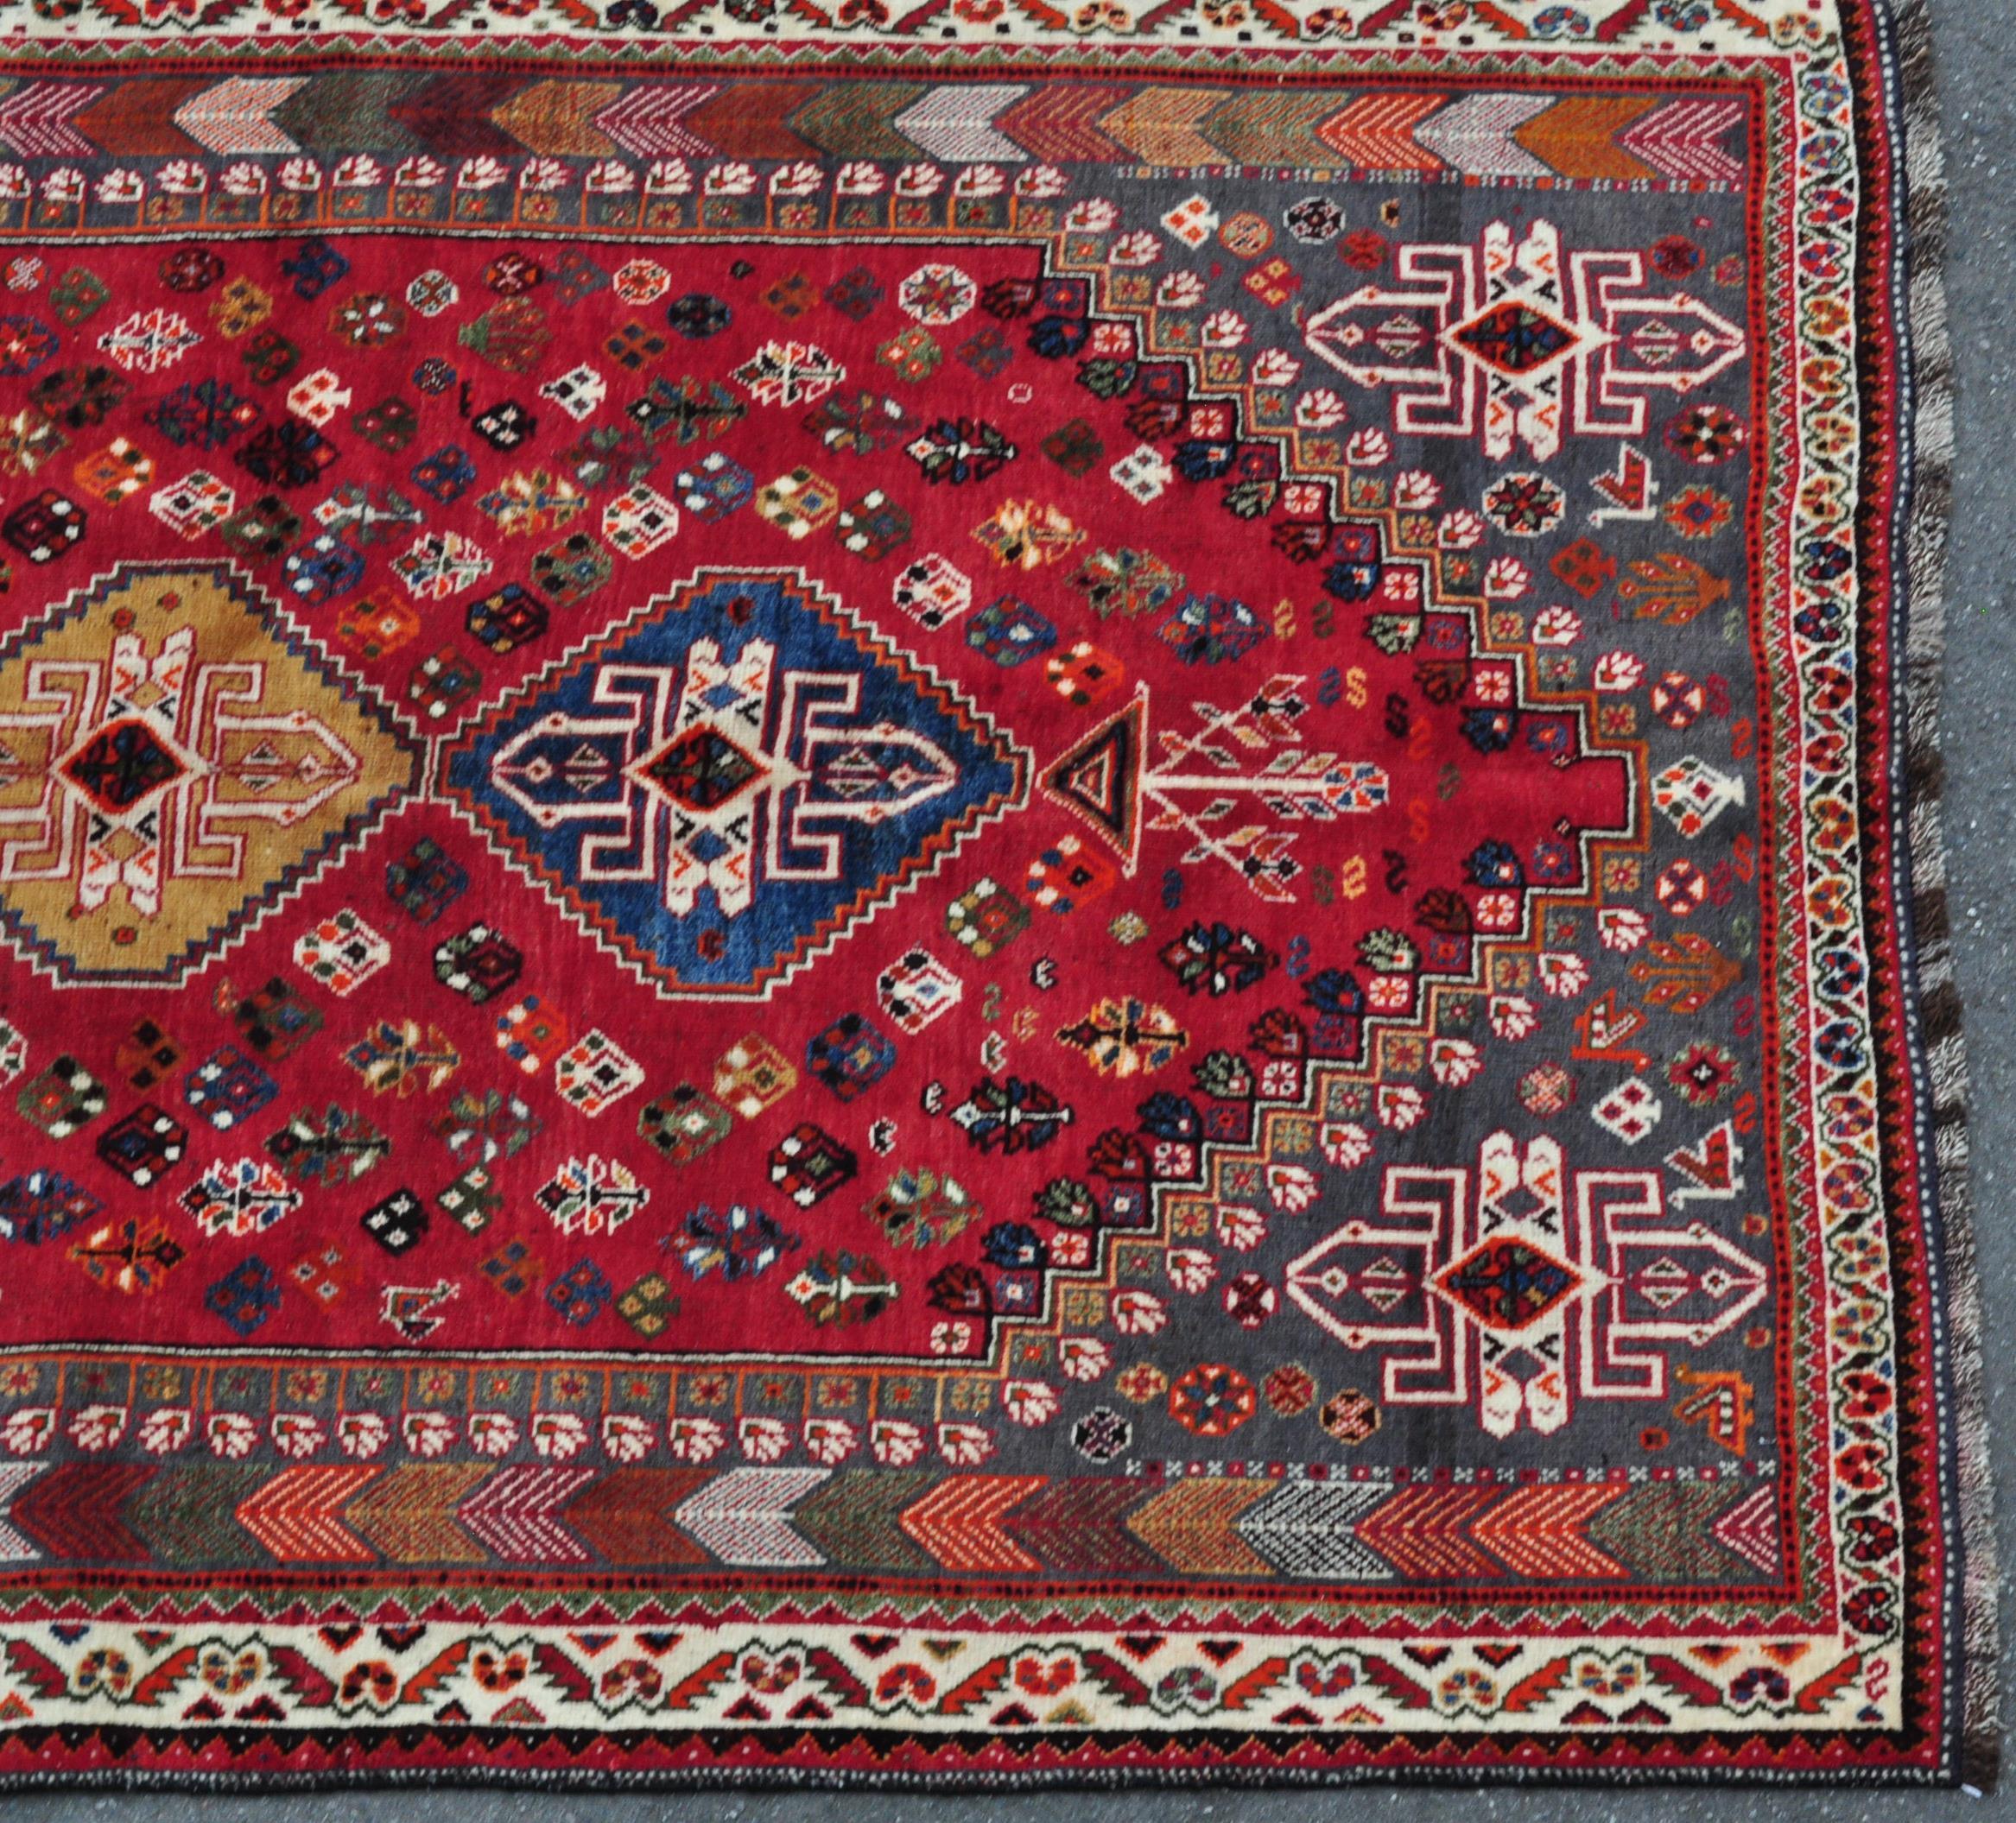 EARLY 20TH CENTURY WOOL ON WOOL HAND KNOTTED PERSIAN ISLAMIC QASHGAI RUG - Image 3 of 4